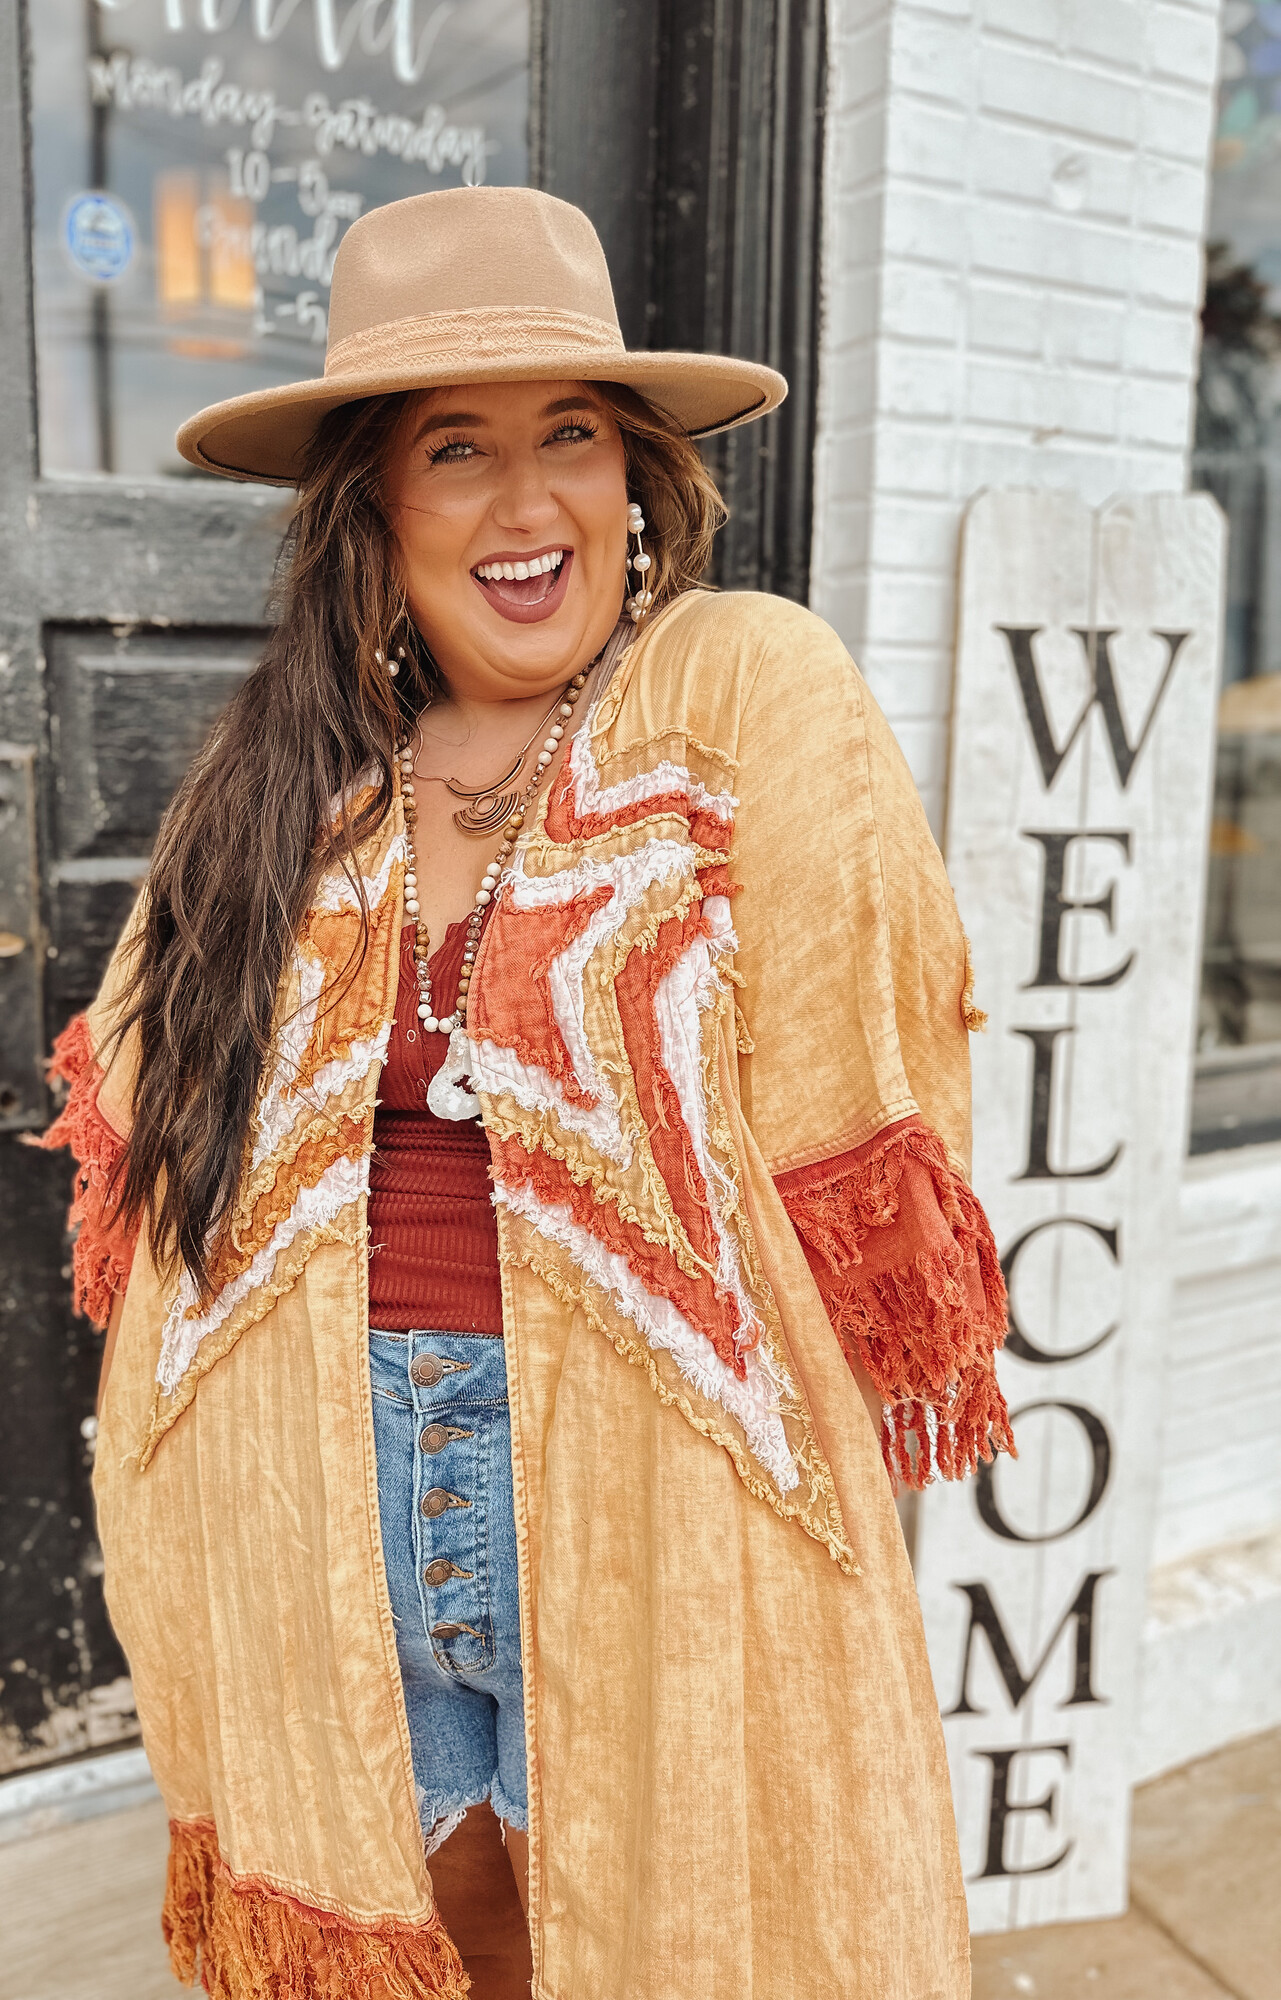 This stunning kimono is high quality and one of a kind! Layers of stitched stars make this piece one that turns heads! The warm tone burnt colors look beautiful with the distressed fringe sleeves!